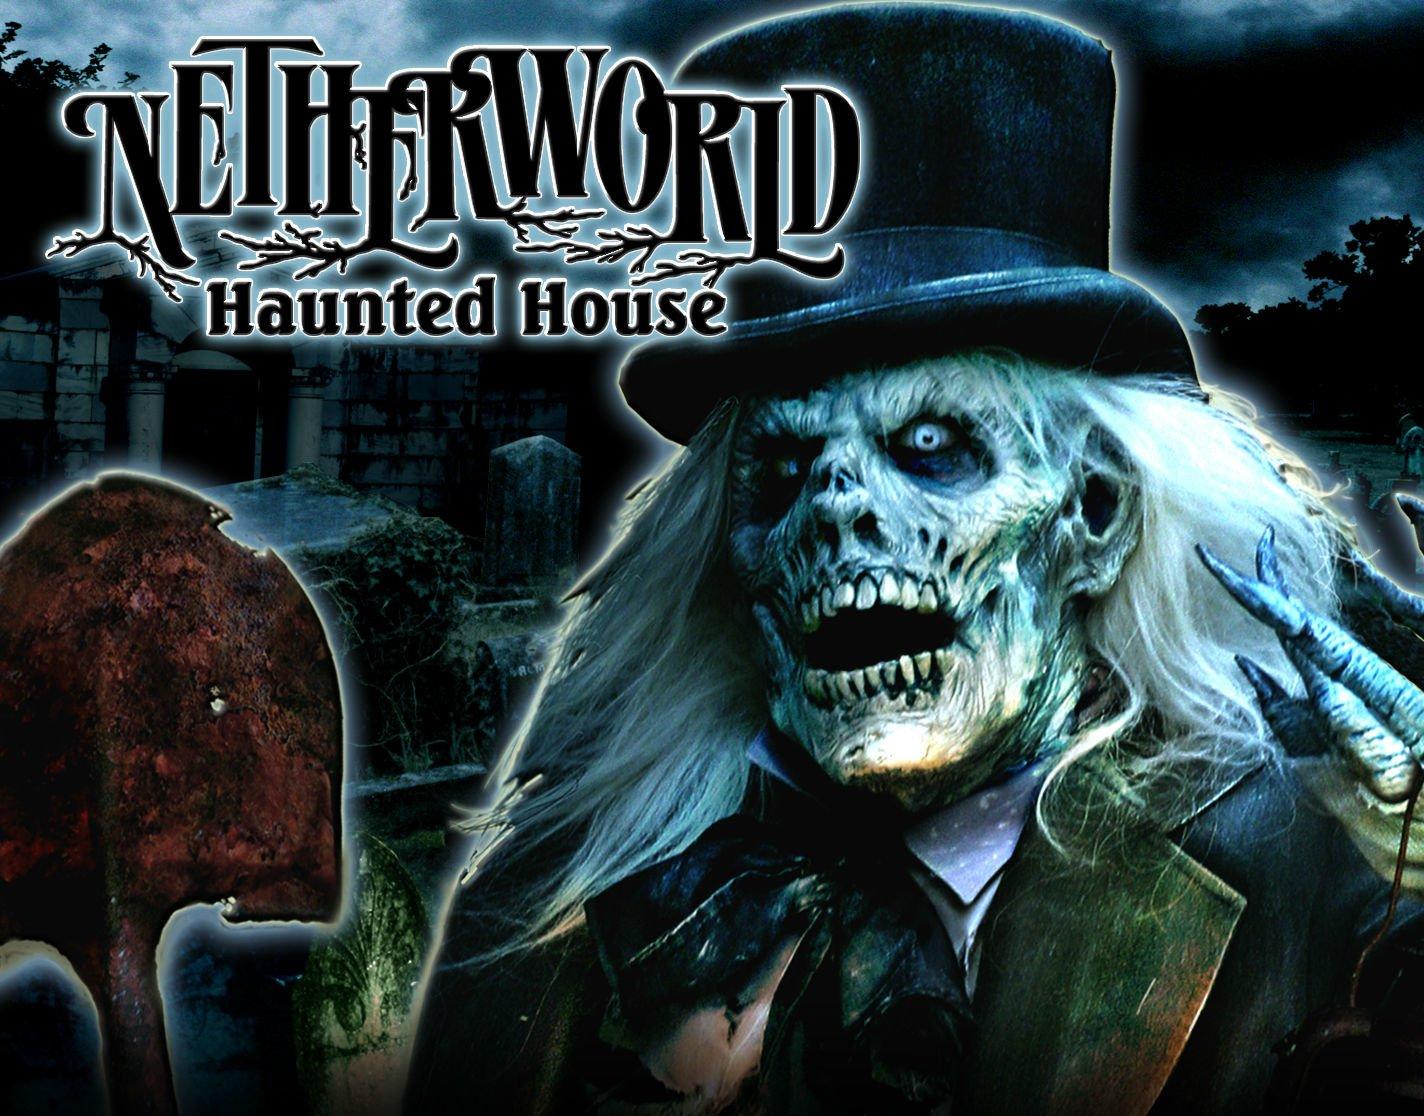 Wallpaper by © NETHERWORLD Haunted House